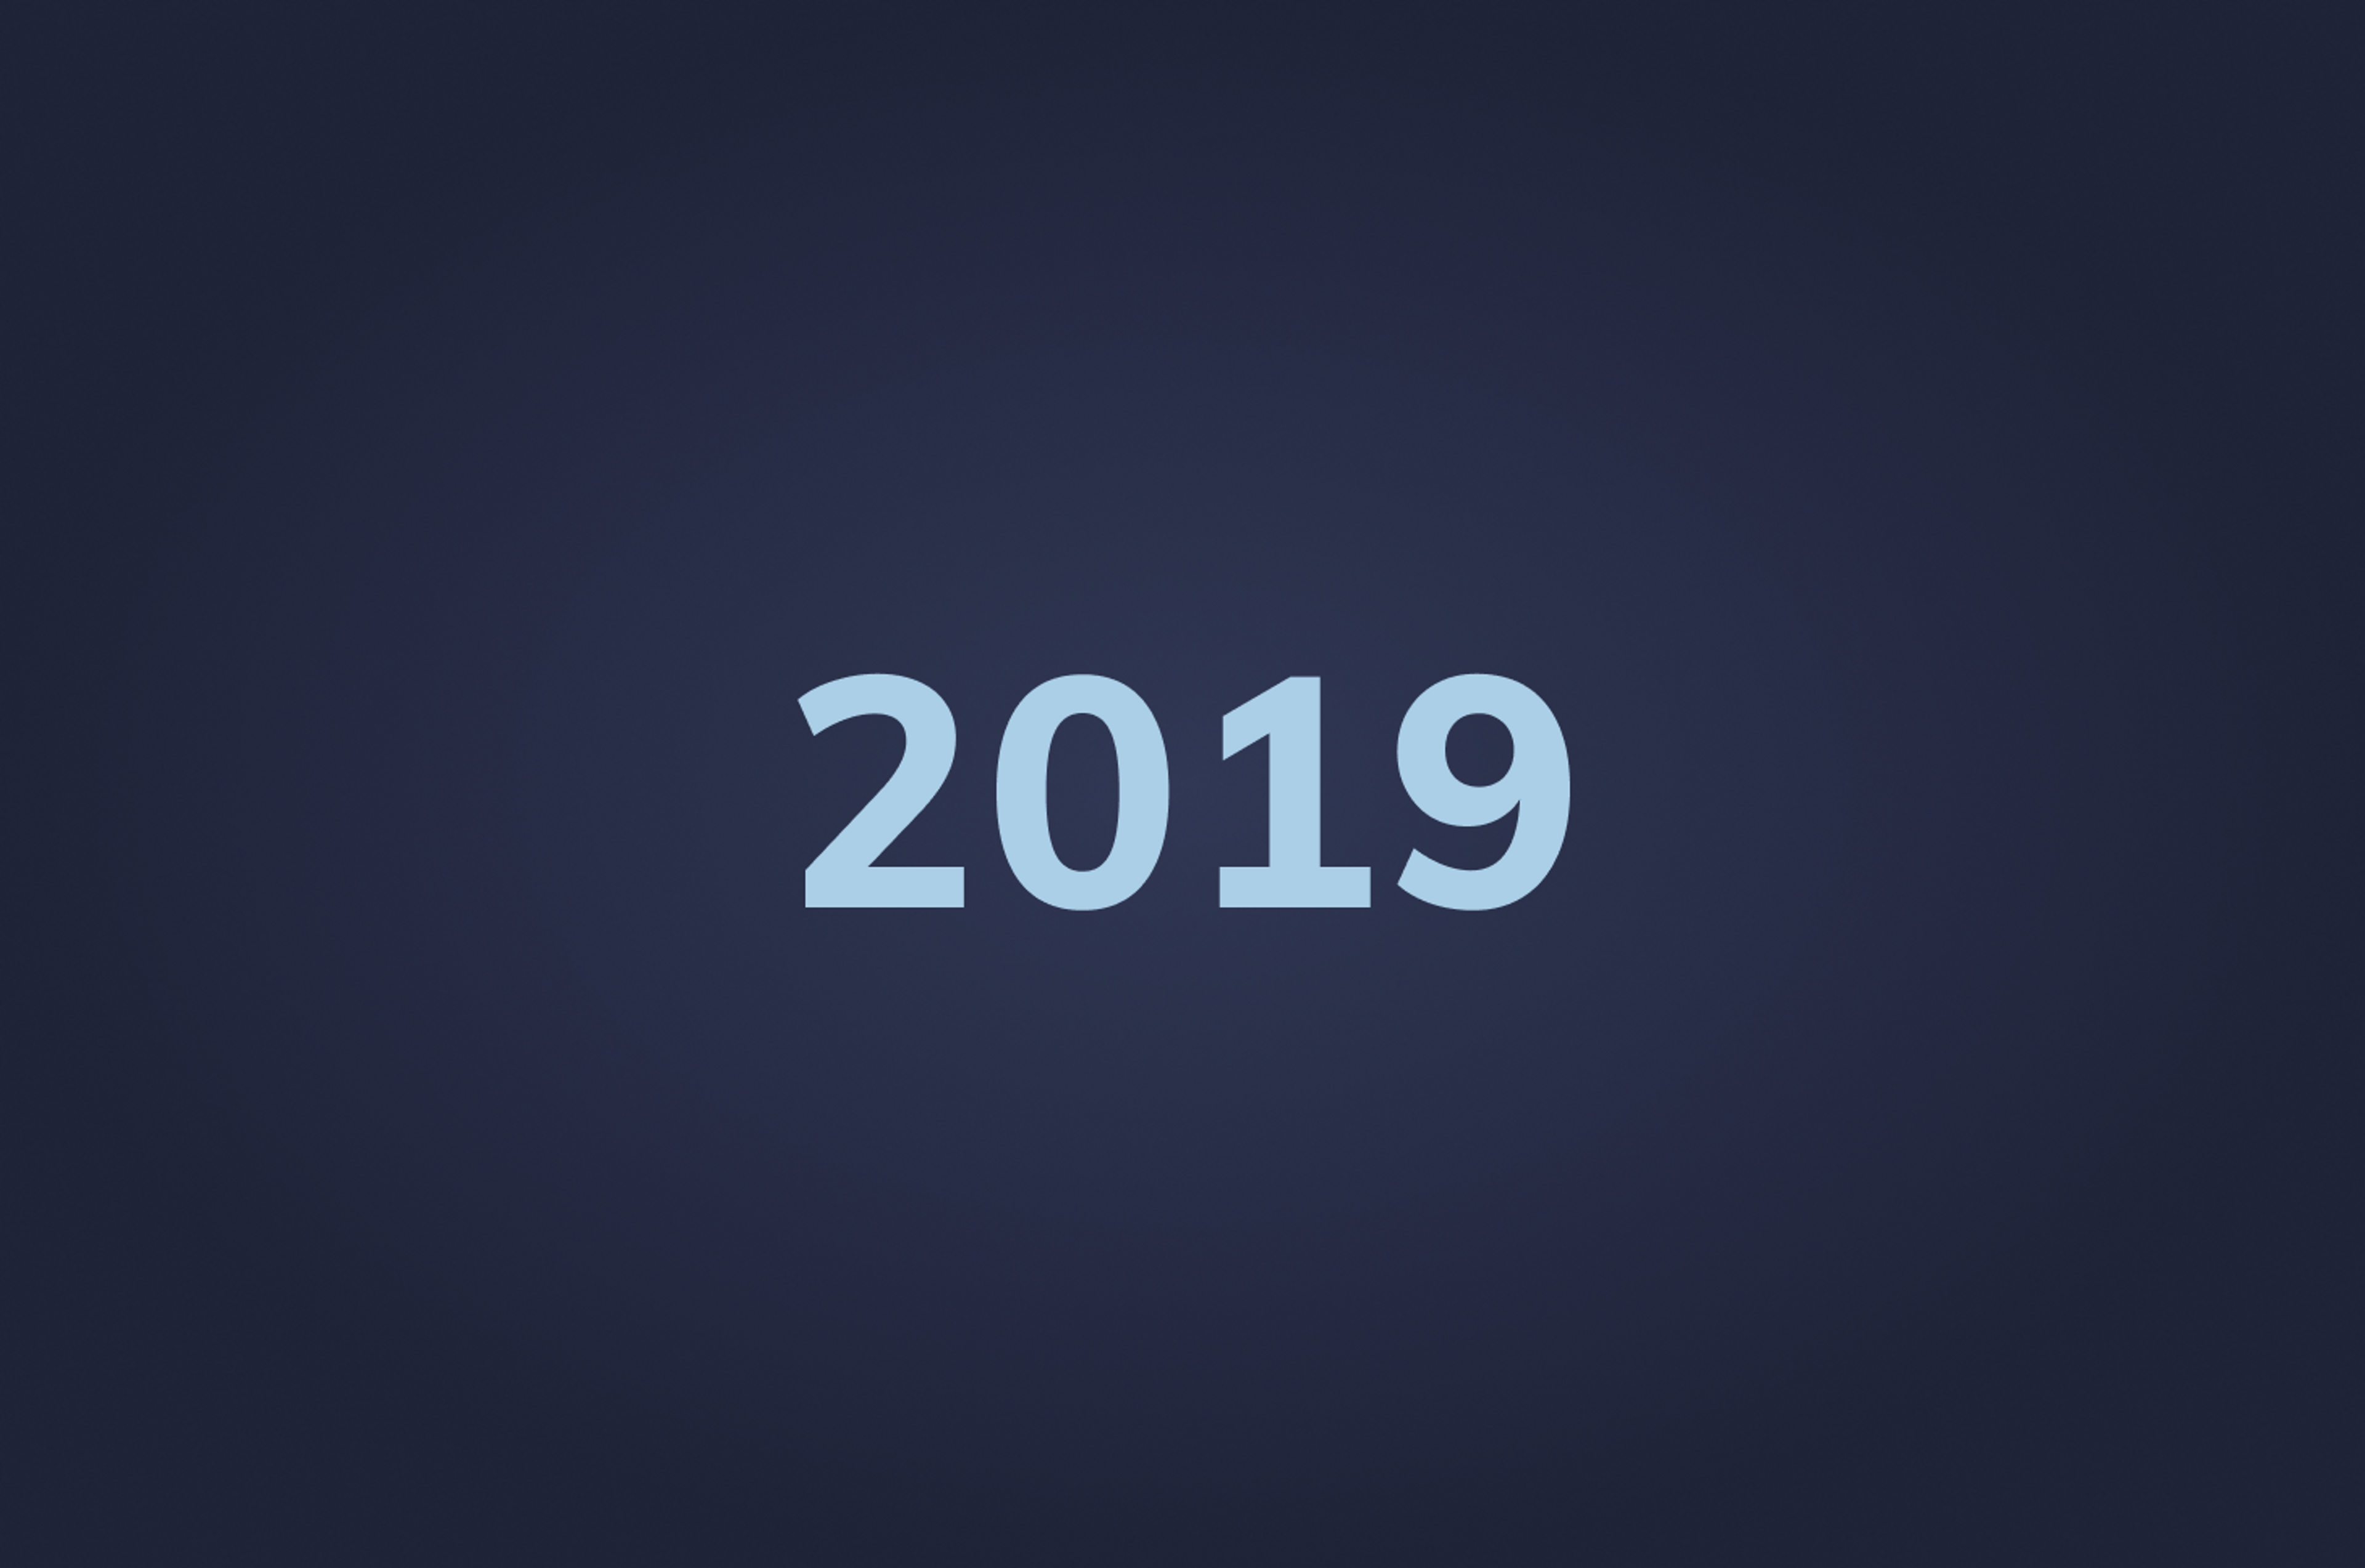 Database Research in 2019: The Year in Review